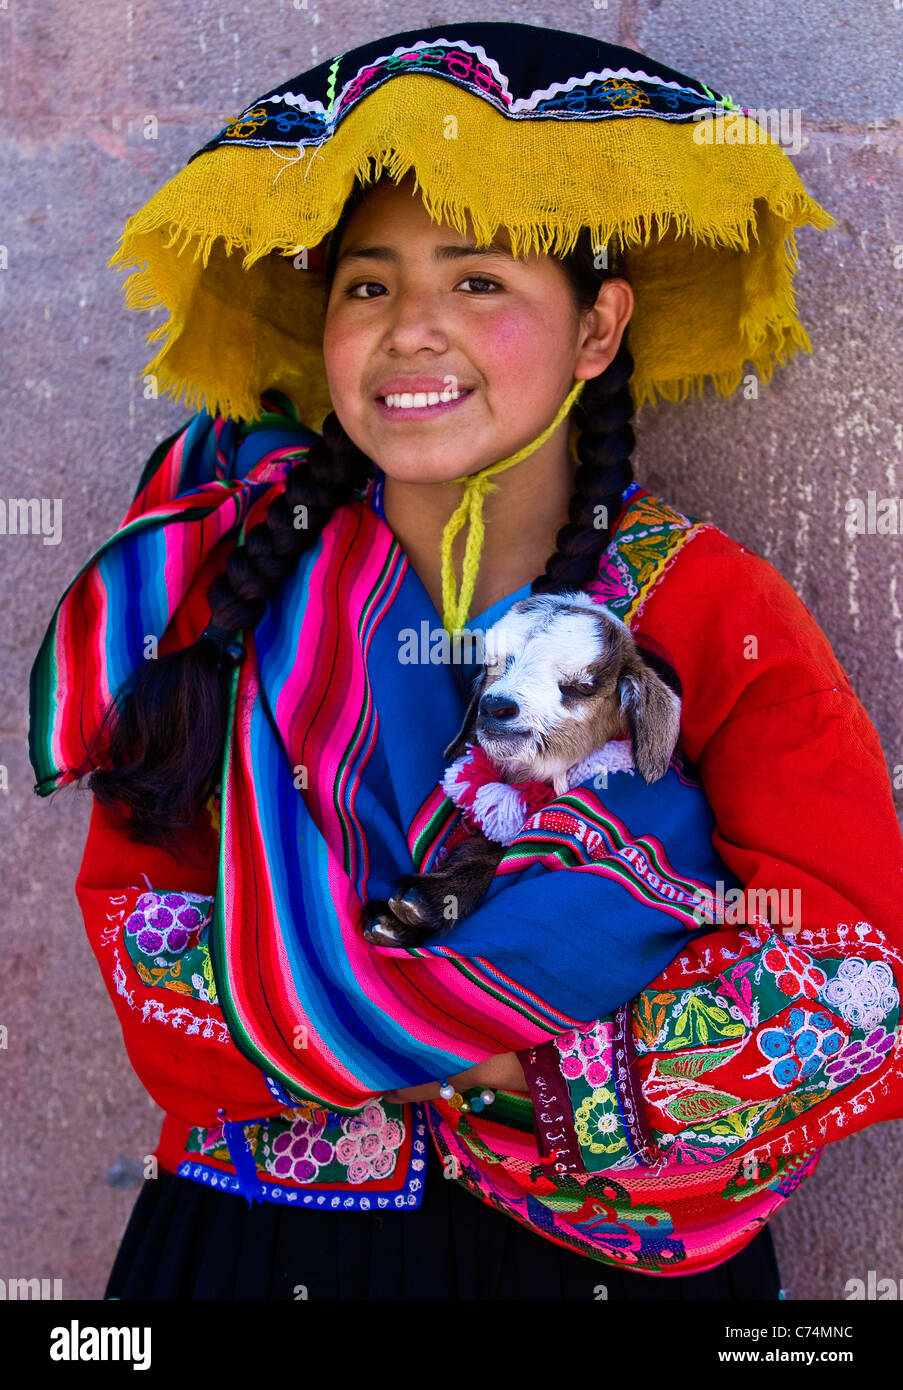 Peruvian Girl High Resolution Stock Photography and Images - Alamy